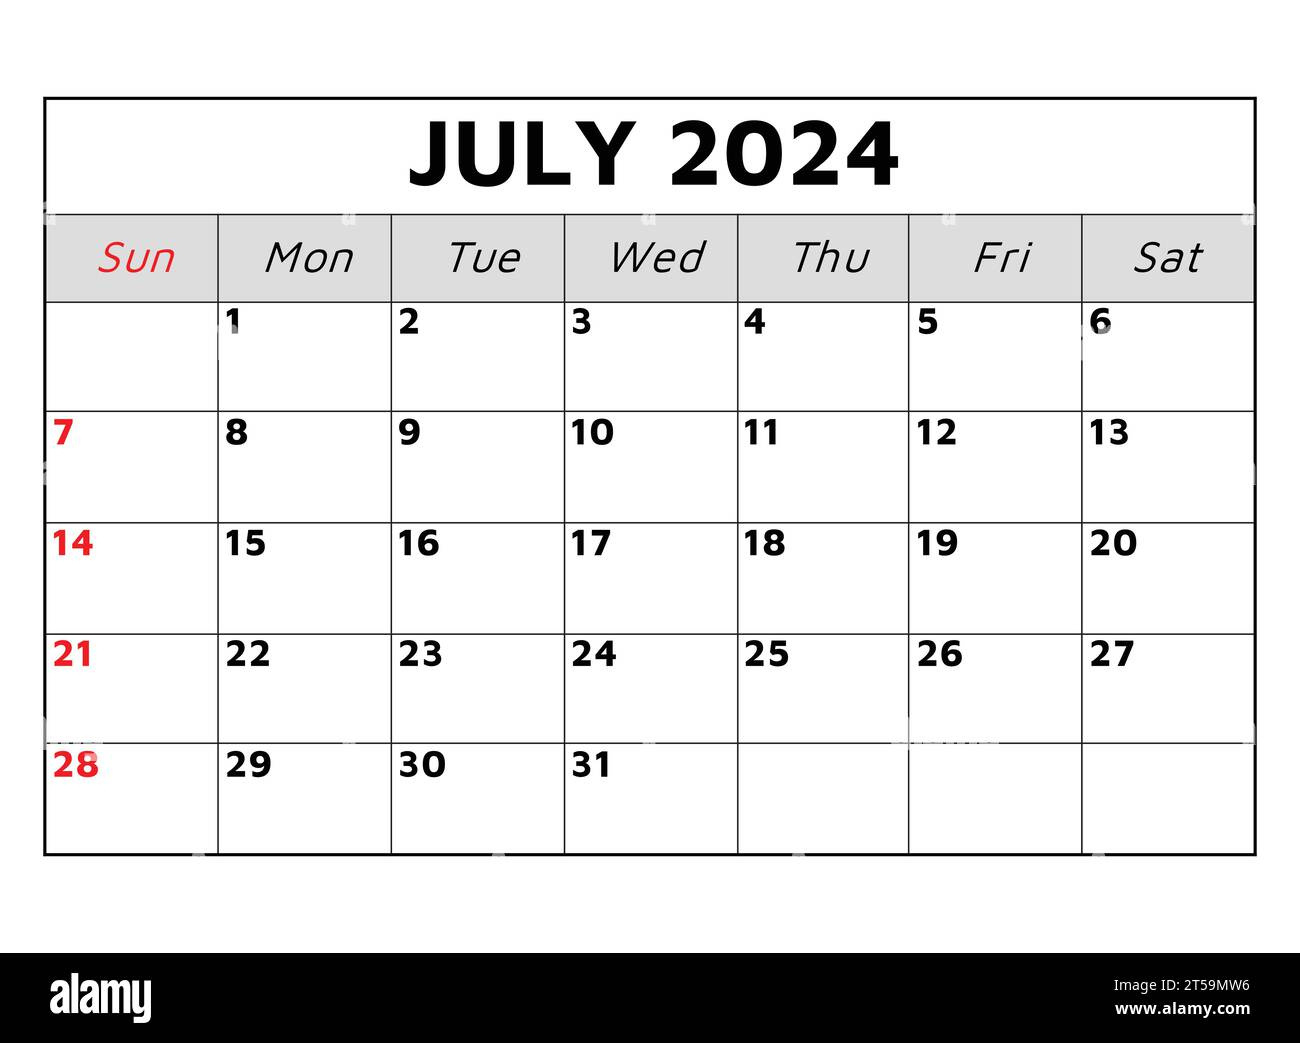 July 2024 Calendar. Vector Illustration. Monthly Planning For Your with July Events Calendar 2024